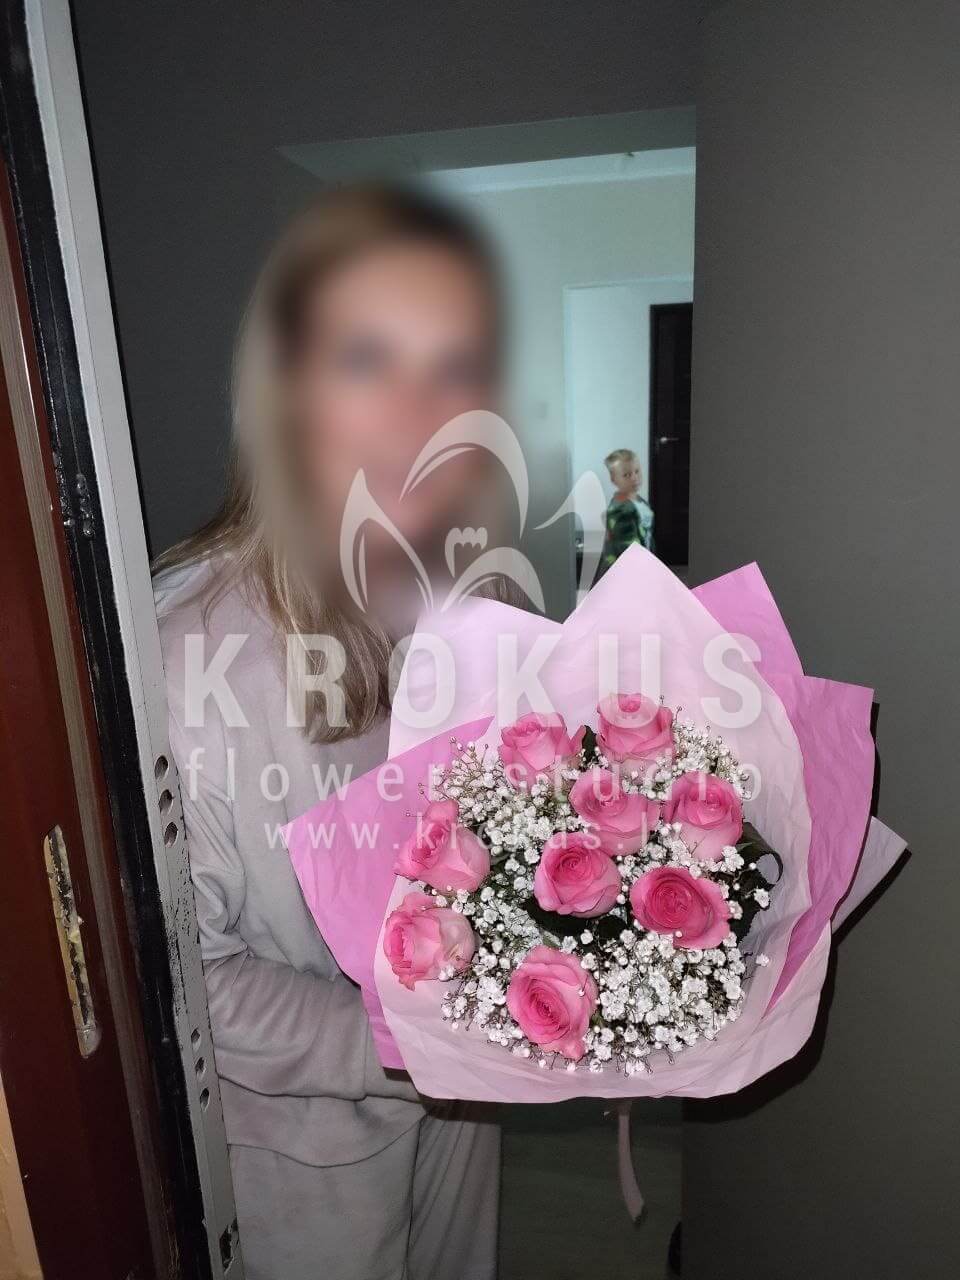 Deliver flowers to Rīga (pink rosesgypsophila)